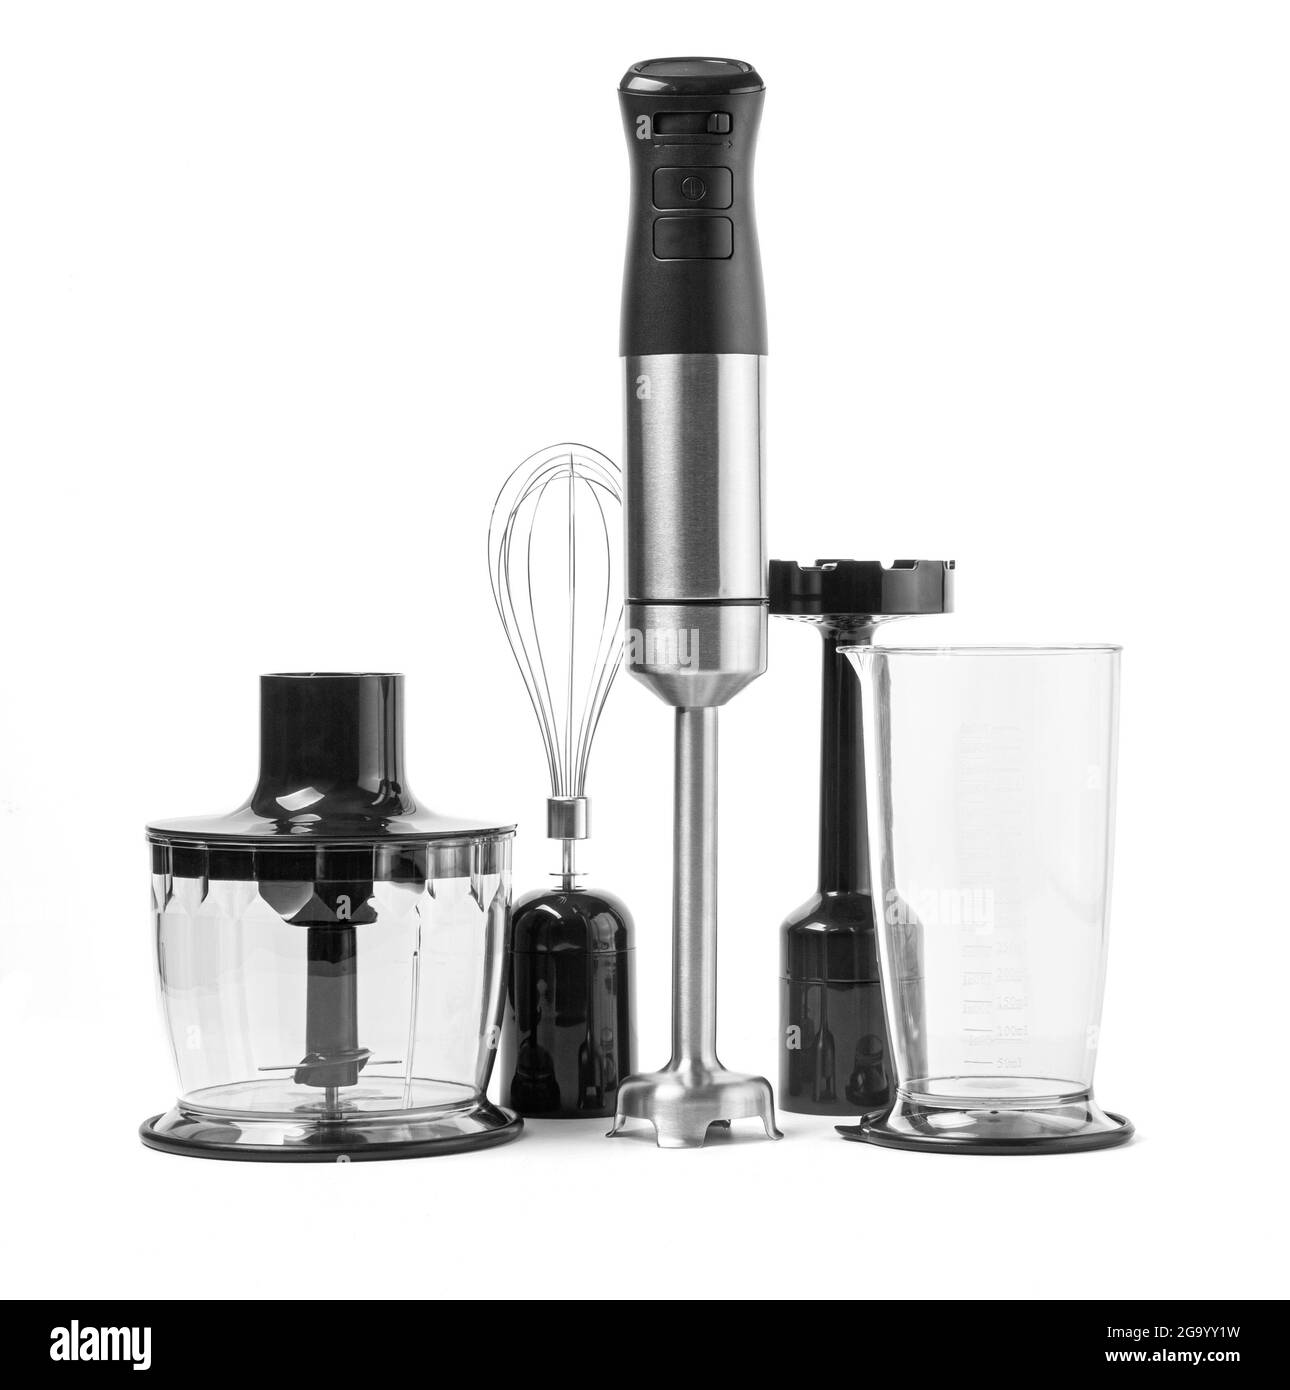 https://c8.alamy.com/comp/2G9YY1W/immersion-hand-blender-isolated-on-white-stainless-steel-hand-held-stick-blender-modern-kitchen-blade-grinder-electric-kitchen-small-appliances-2G9YY1W.jpg